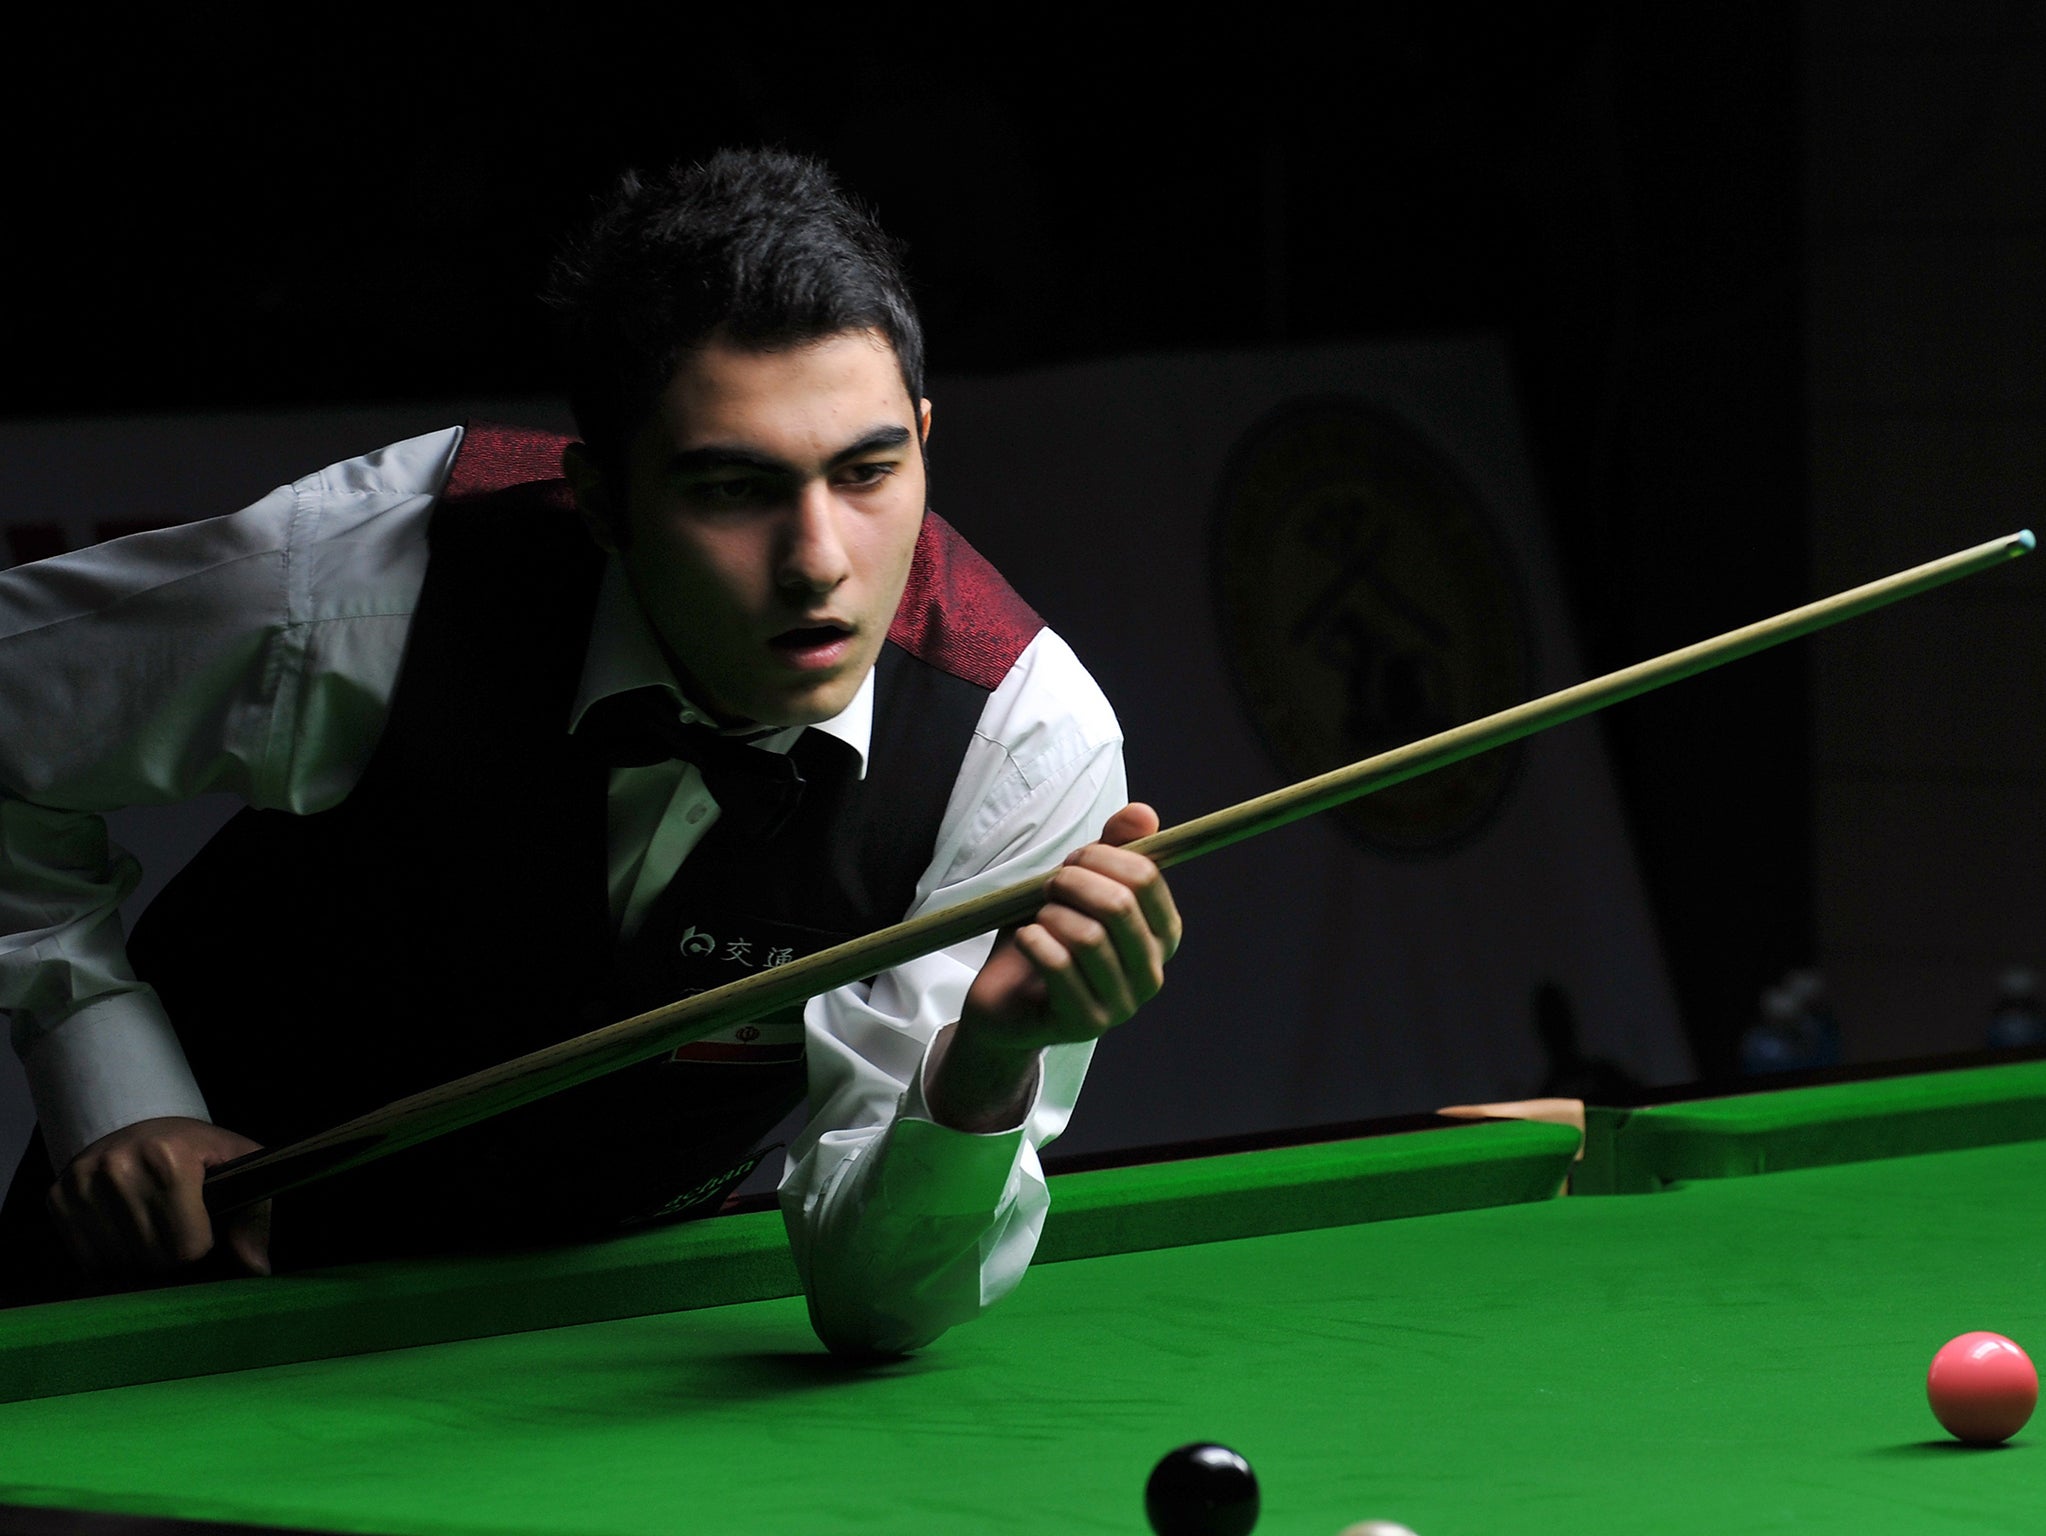 Things have done been easy for the young snooker sensation